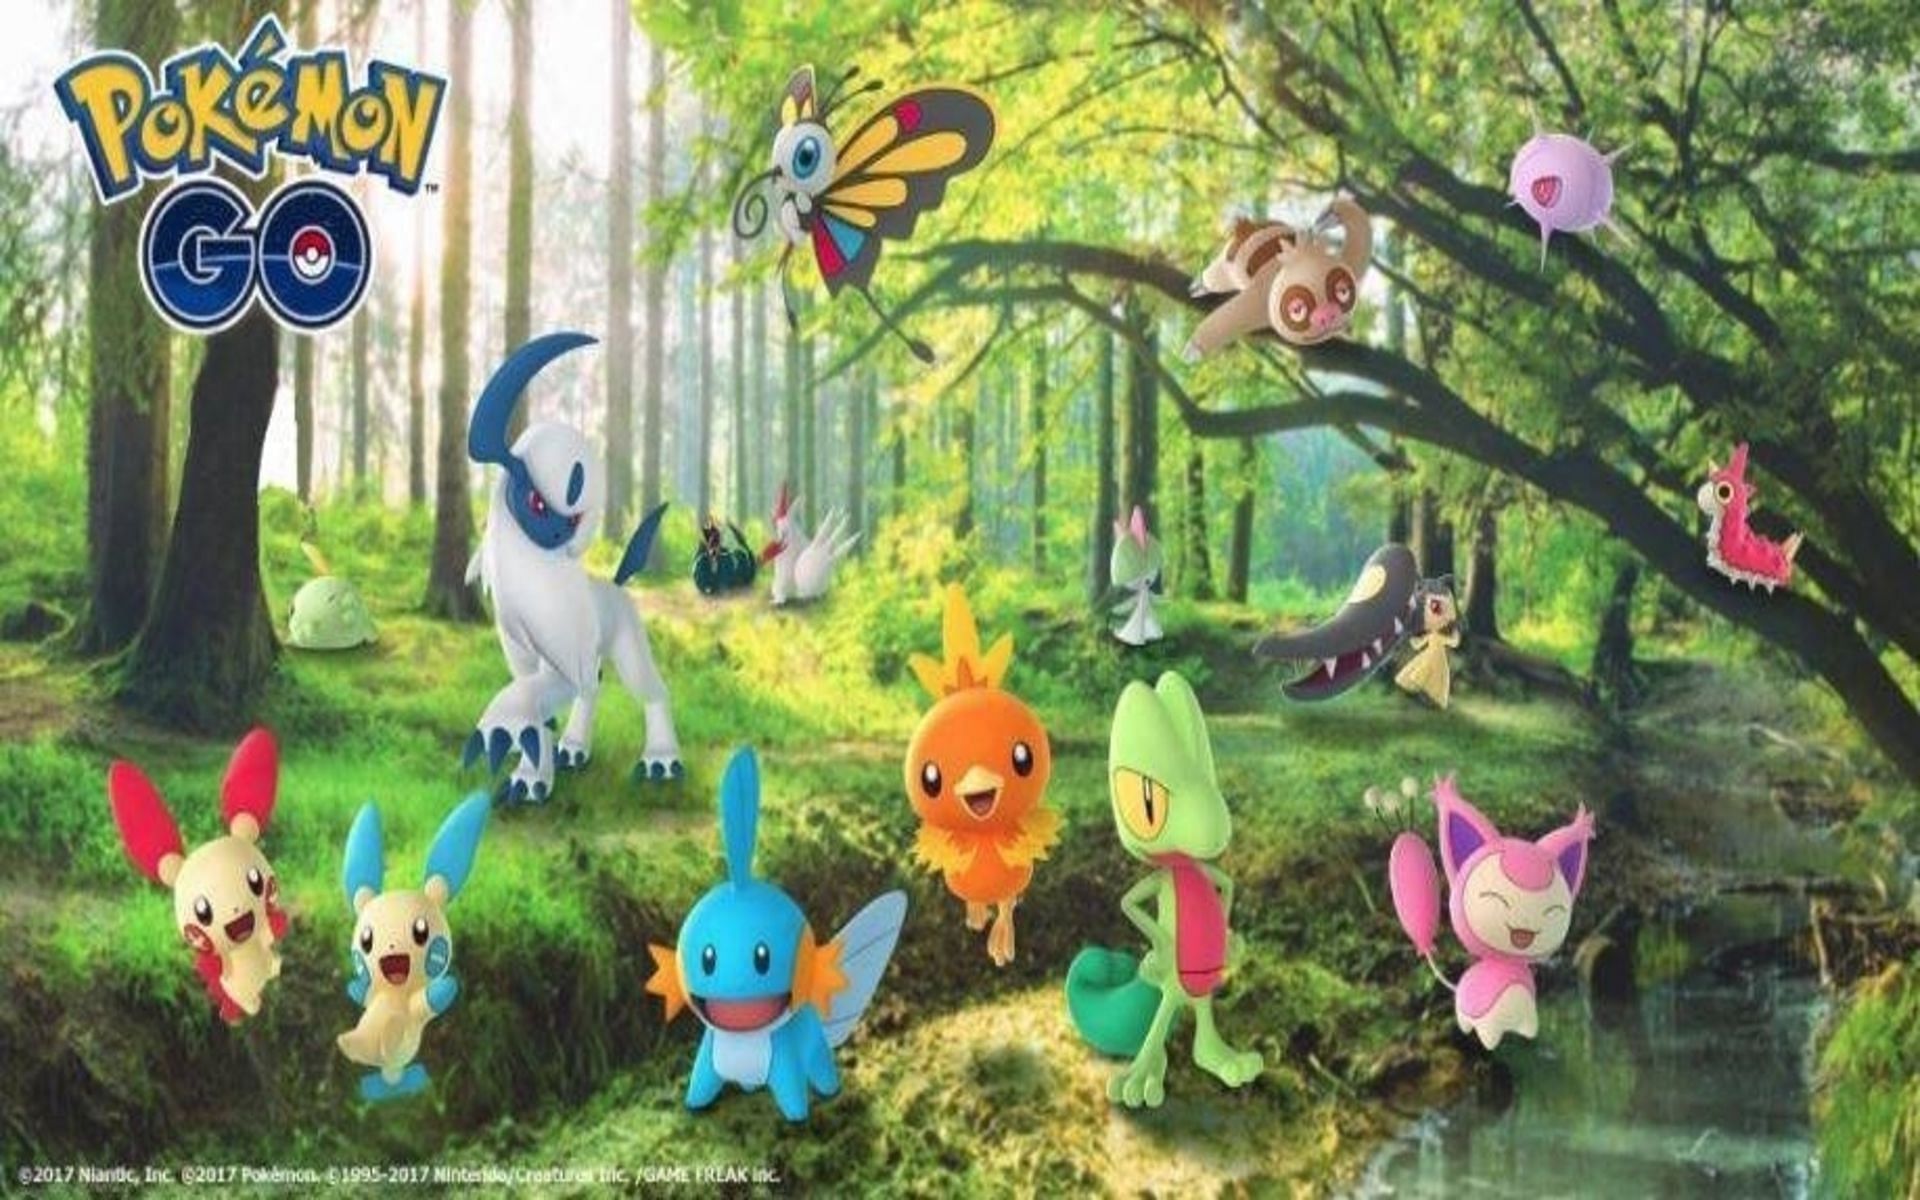 The Hoenn starters can be found in Pokemon GO as well (Image via Niantic)